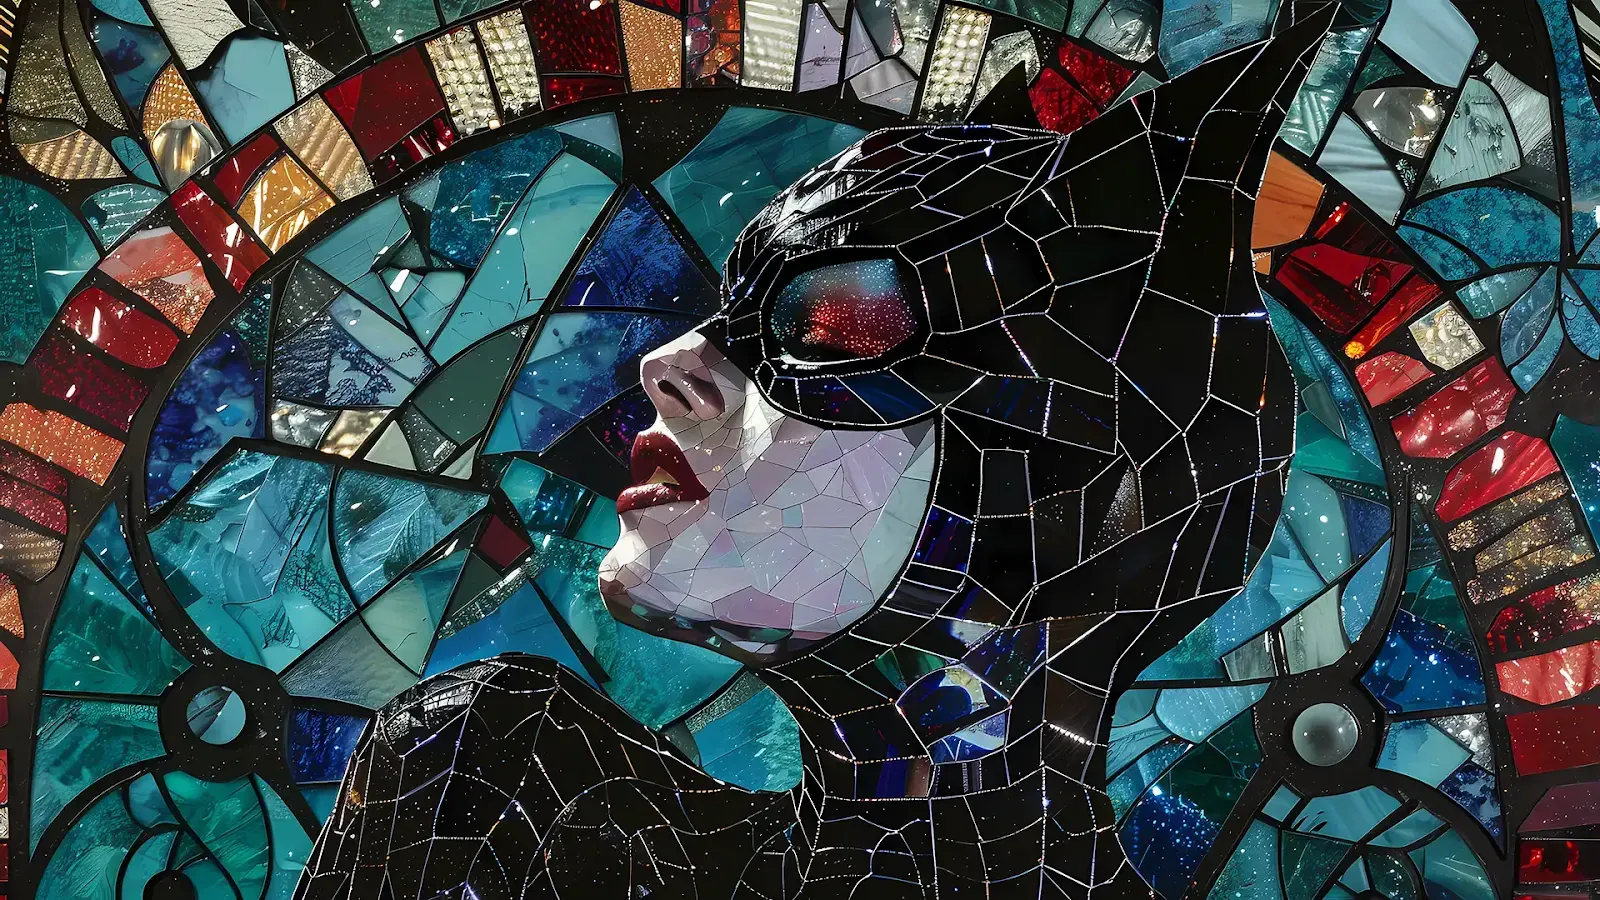 ai illustration in mosaic style of dc comics catwoman from batman universe, Use as background wallpaper for desktop or image, picture